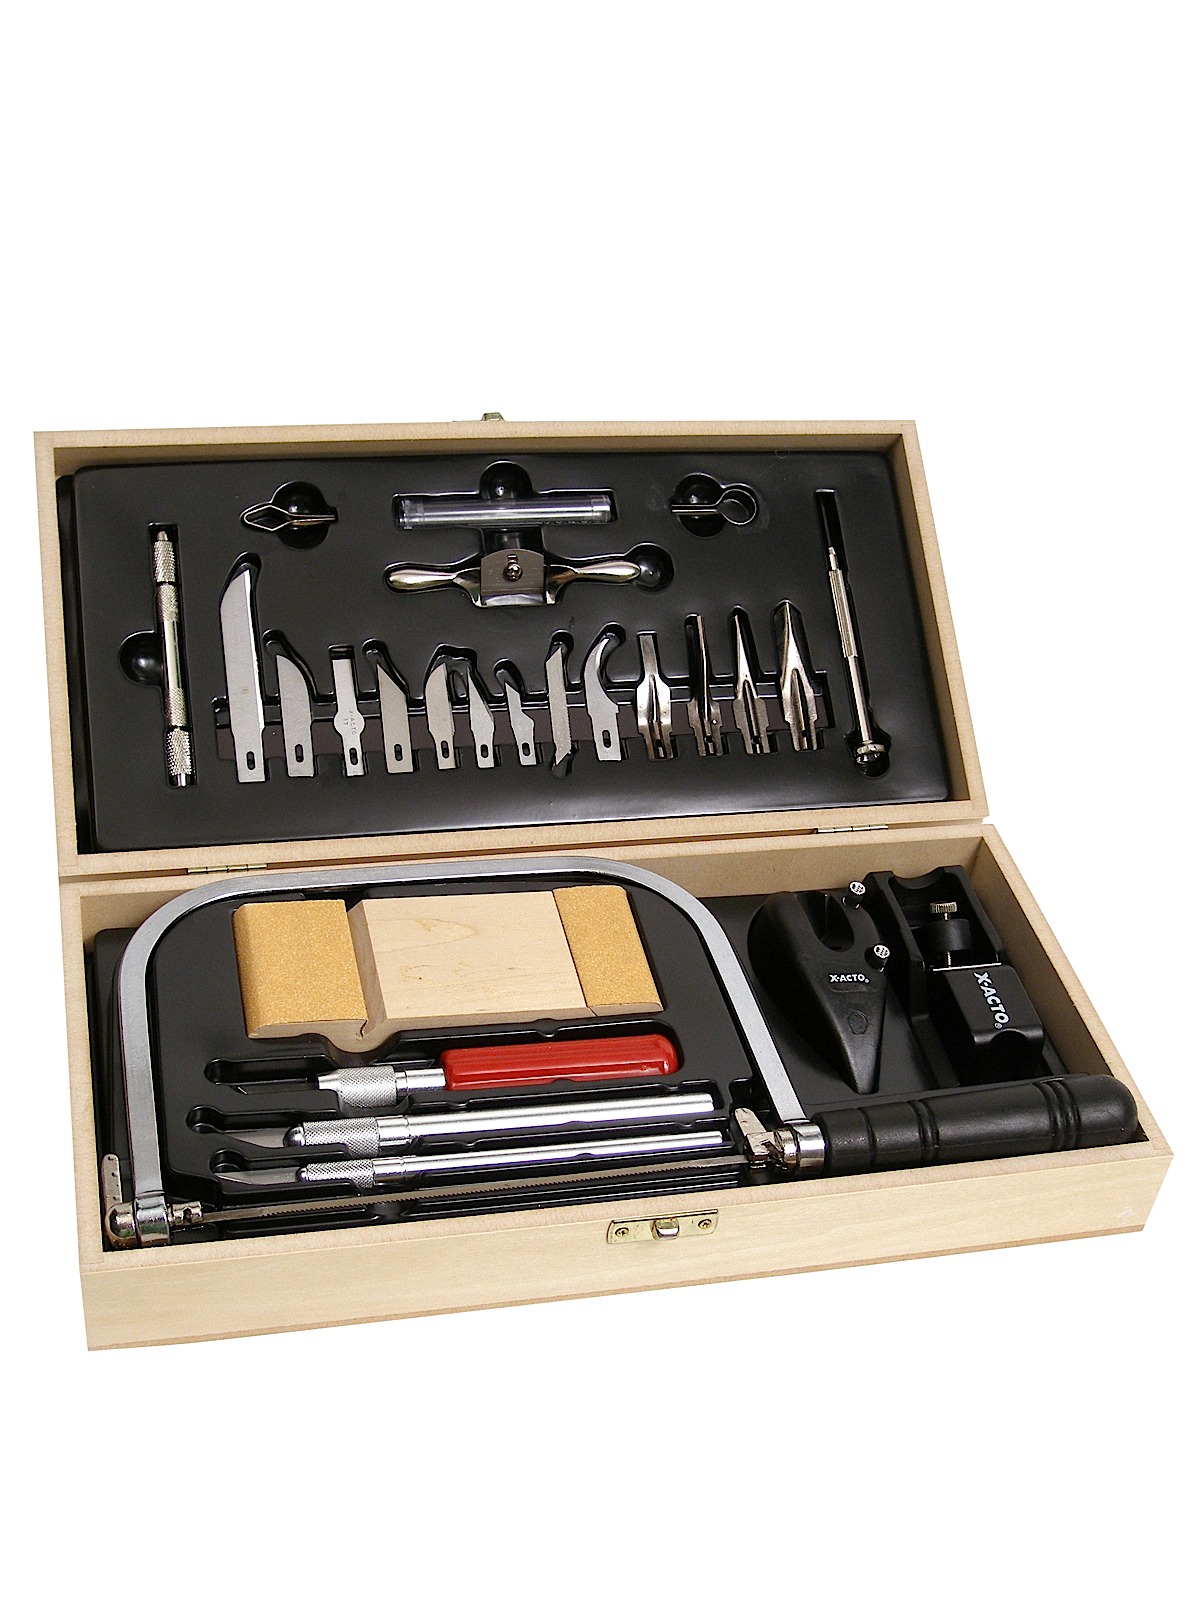 X-ACTO Hobbytool Set Great for Arts and Crafts Including Pumpkin Carving Deluxe 30 Piece Set